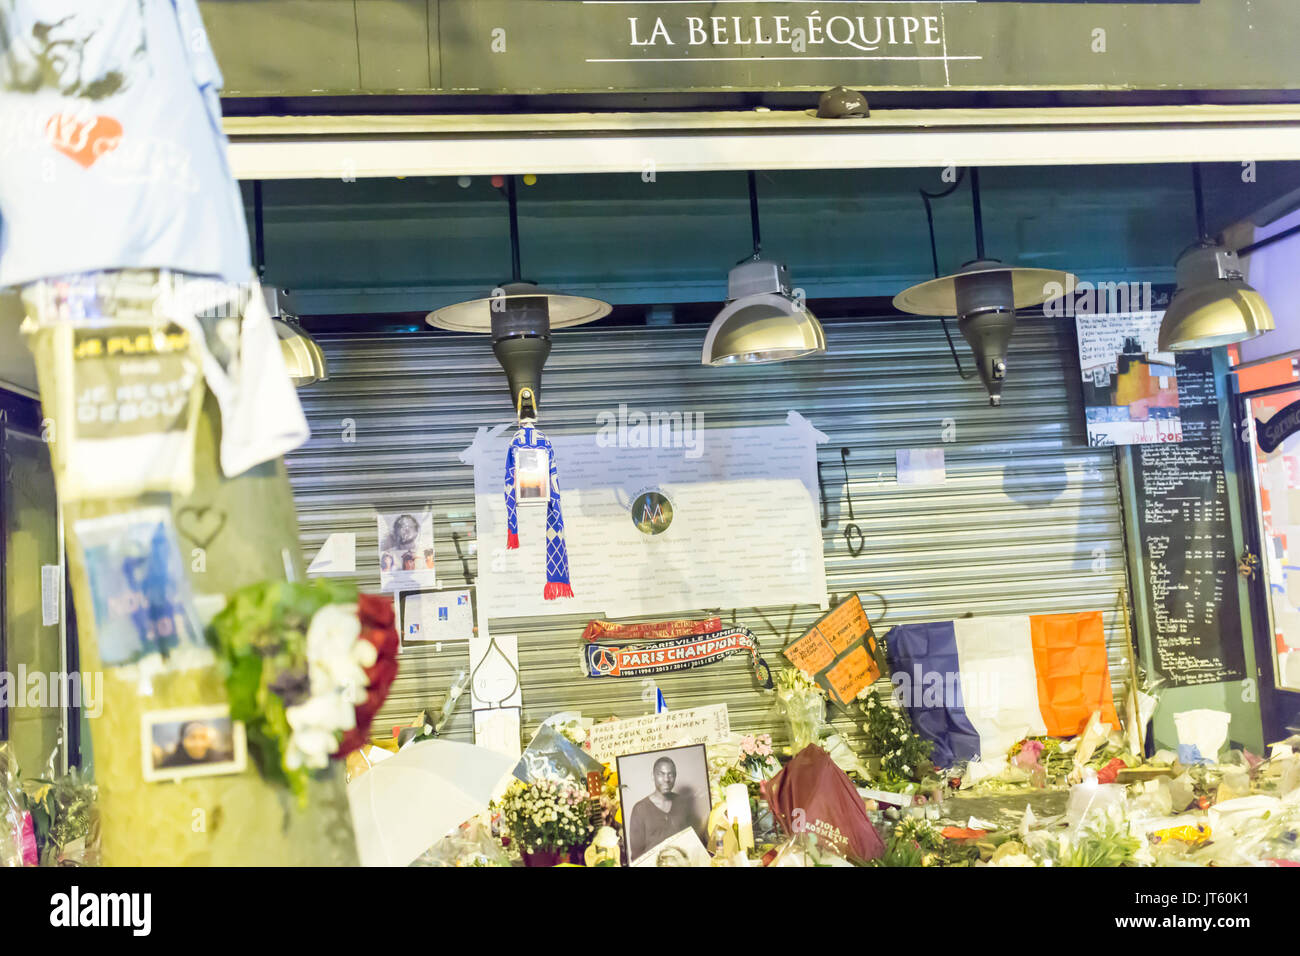 la belle équipe restaurant and terrace. Spontaneous homage at the victims of the terrorist attack in Paris the 13th of november 2015. Stock Photo